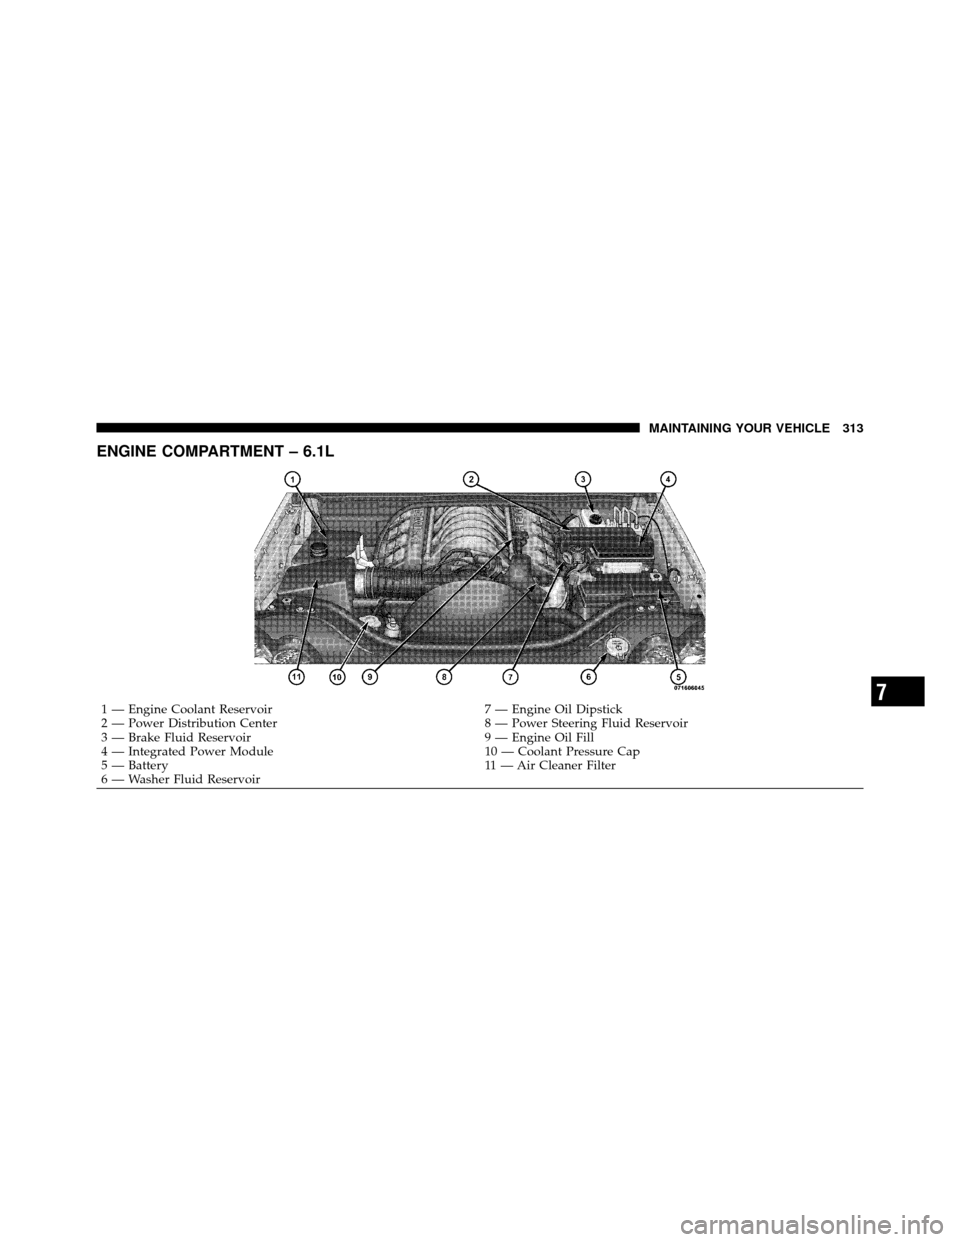 JEEP GRAND CHEROKEE 2010 WK / 3.G SRT Owners Manual ENGINE COMPARTMENT – 6.1L
1 — Engine Coolant Reservoir7 — Engine Oil Dipstick
2 — Power Distribution Center 8 — Power Steering Fluid Reservoir
3 — Brake Fluid Reservoir 9 — Engine Oil Fi